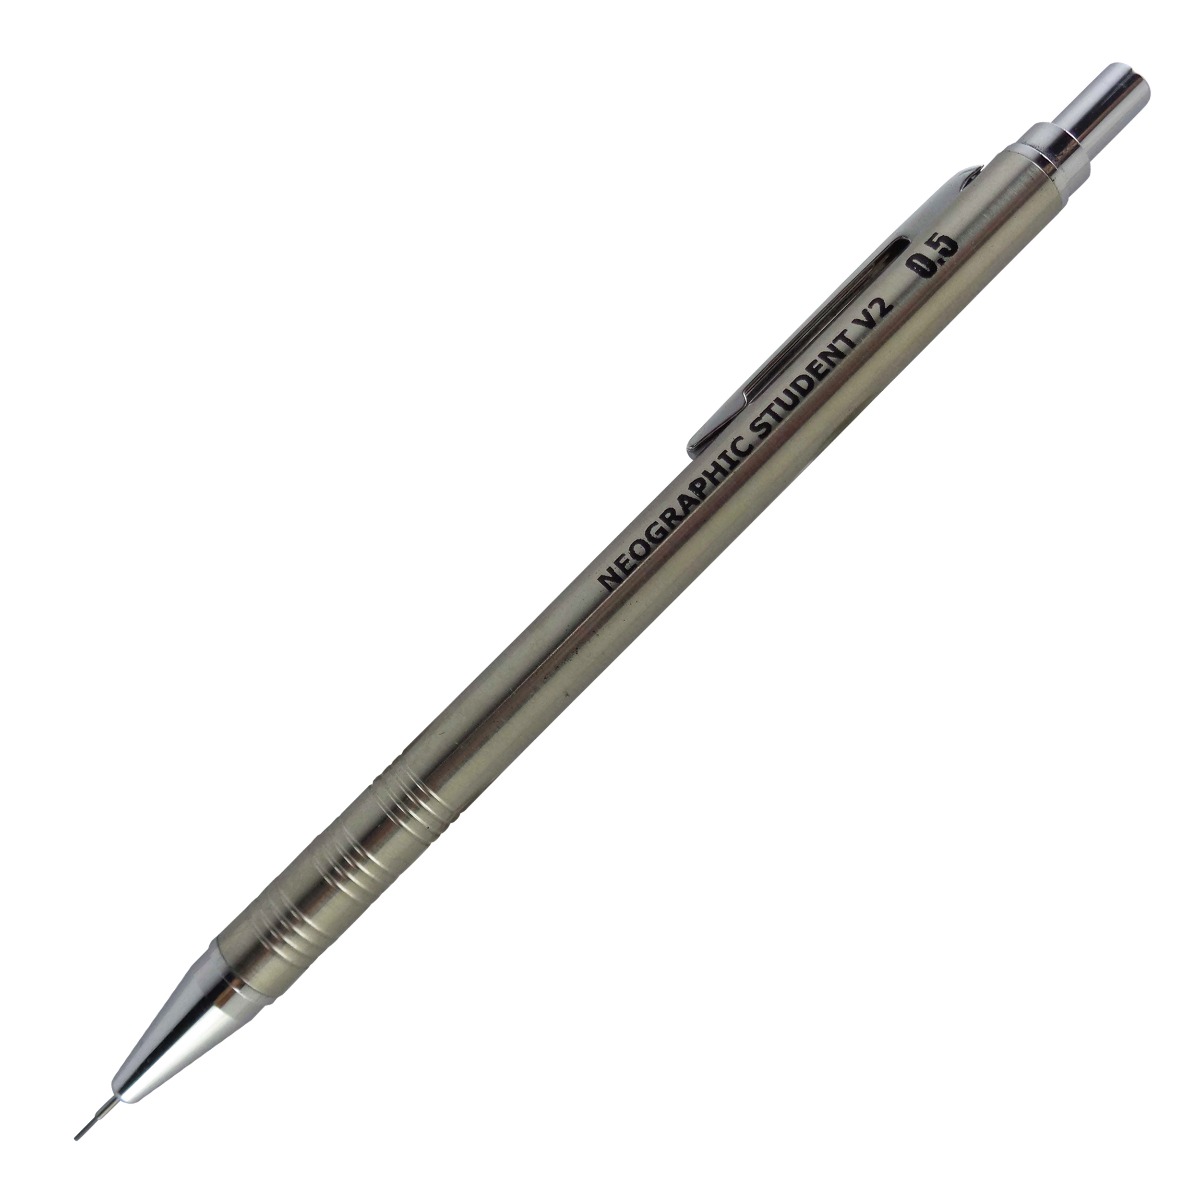 K-Nine Model: 15202 Neographic Silver color body with silver clip 0.5mm tip mechanical pencil